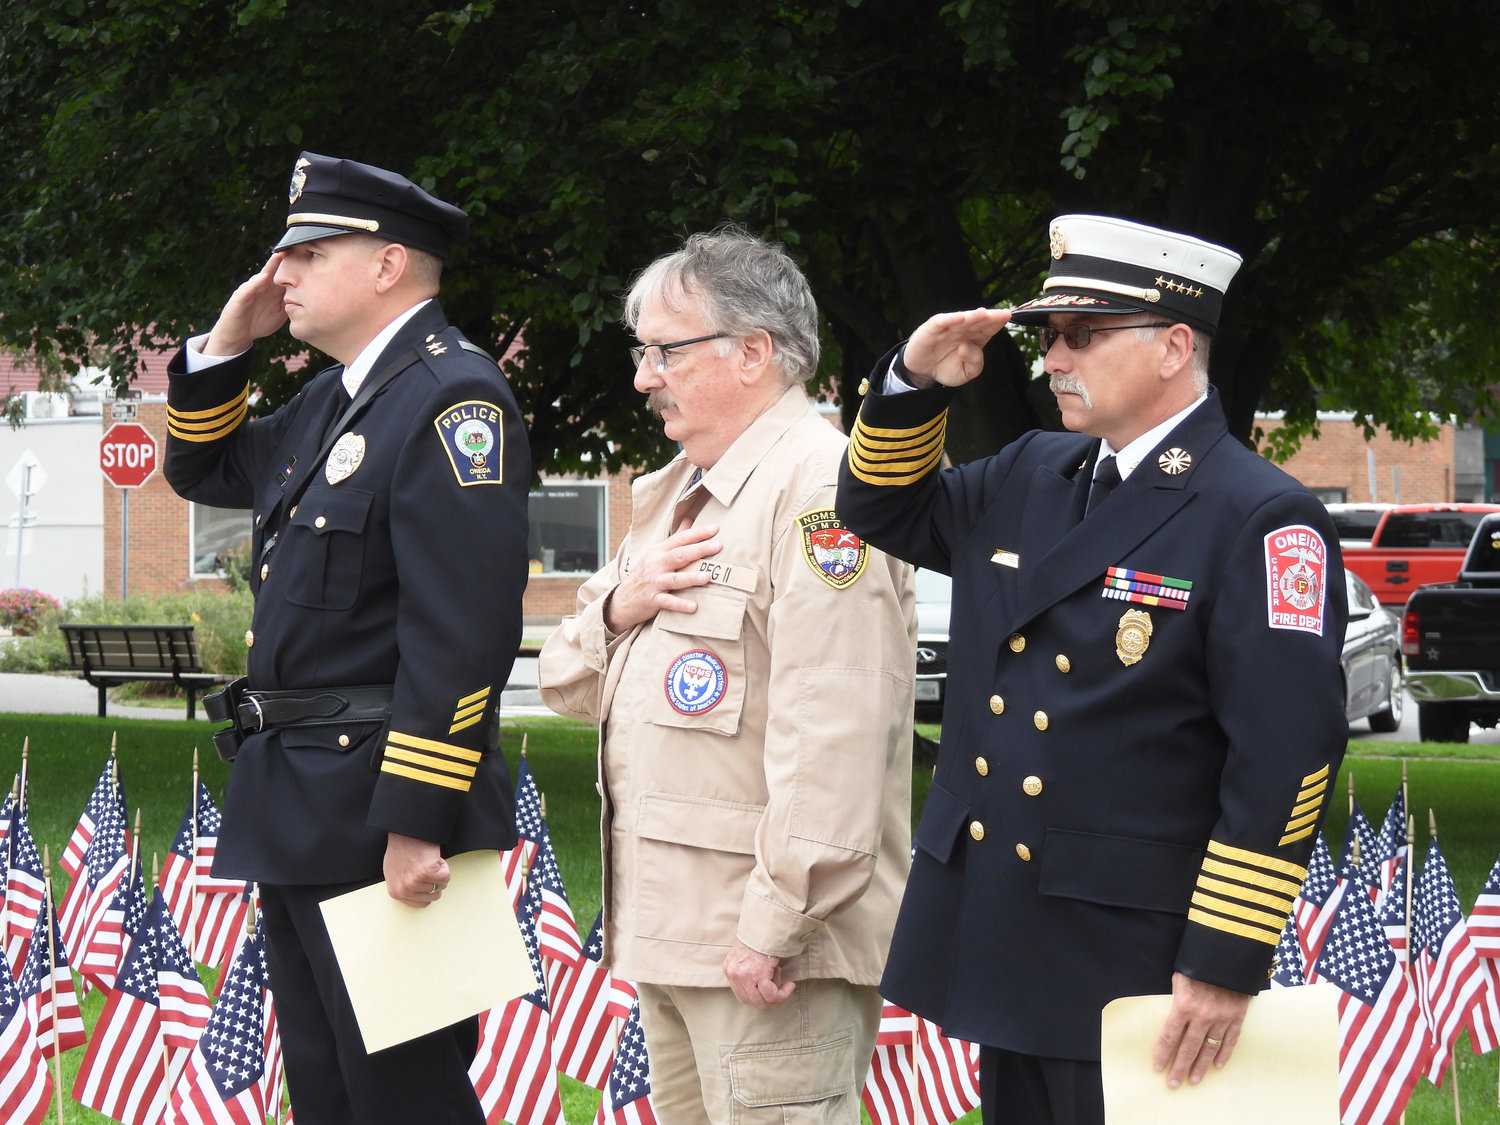 Oneida Police Chief John Little, left, former Madison County Undersheriff Douglas Bailey, and Oneida Fire Chief Dennis Fields stand at attention for the wreath laying ceremony on Sunday at the city's 9/11 Remembrance Ceremony.